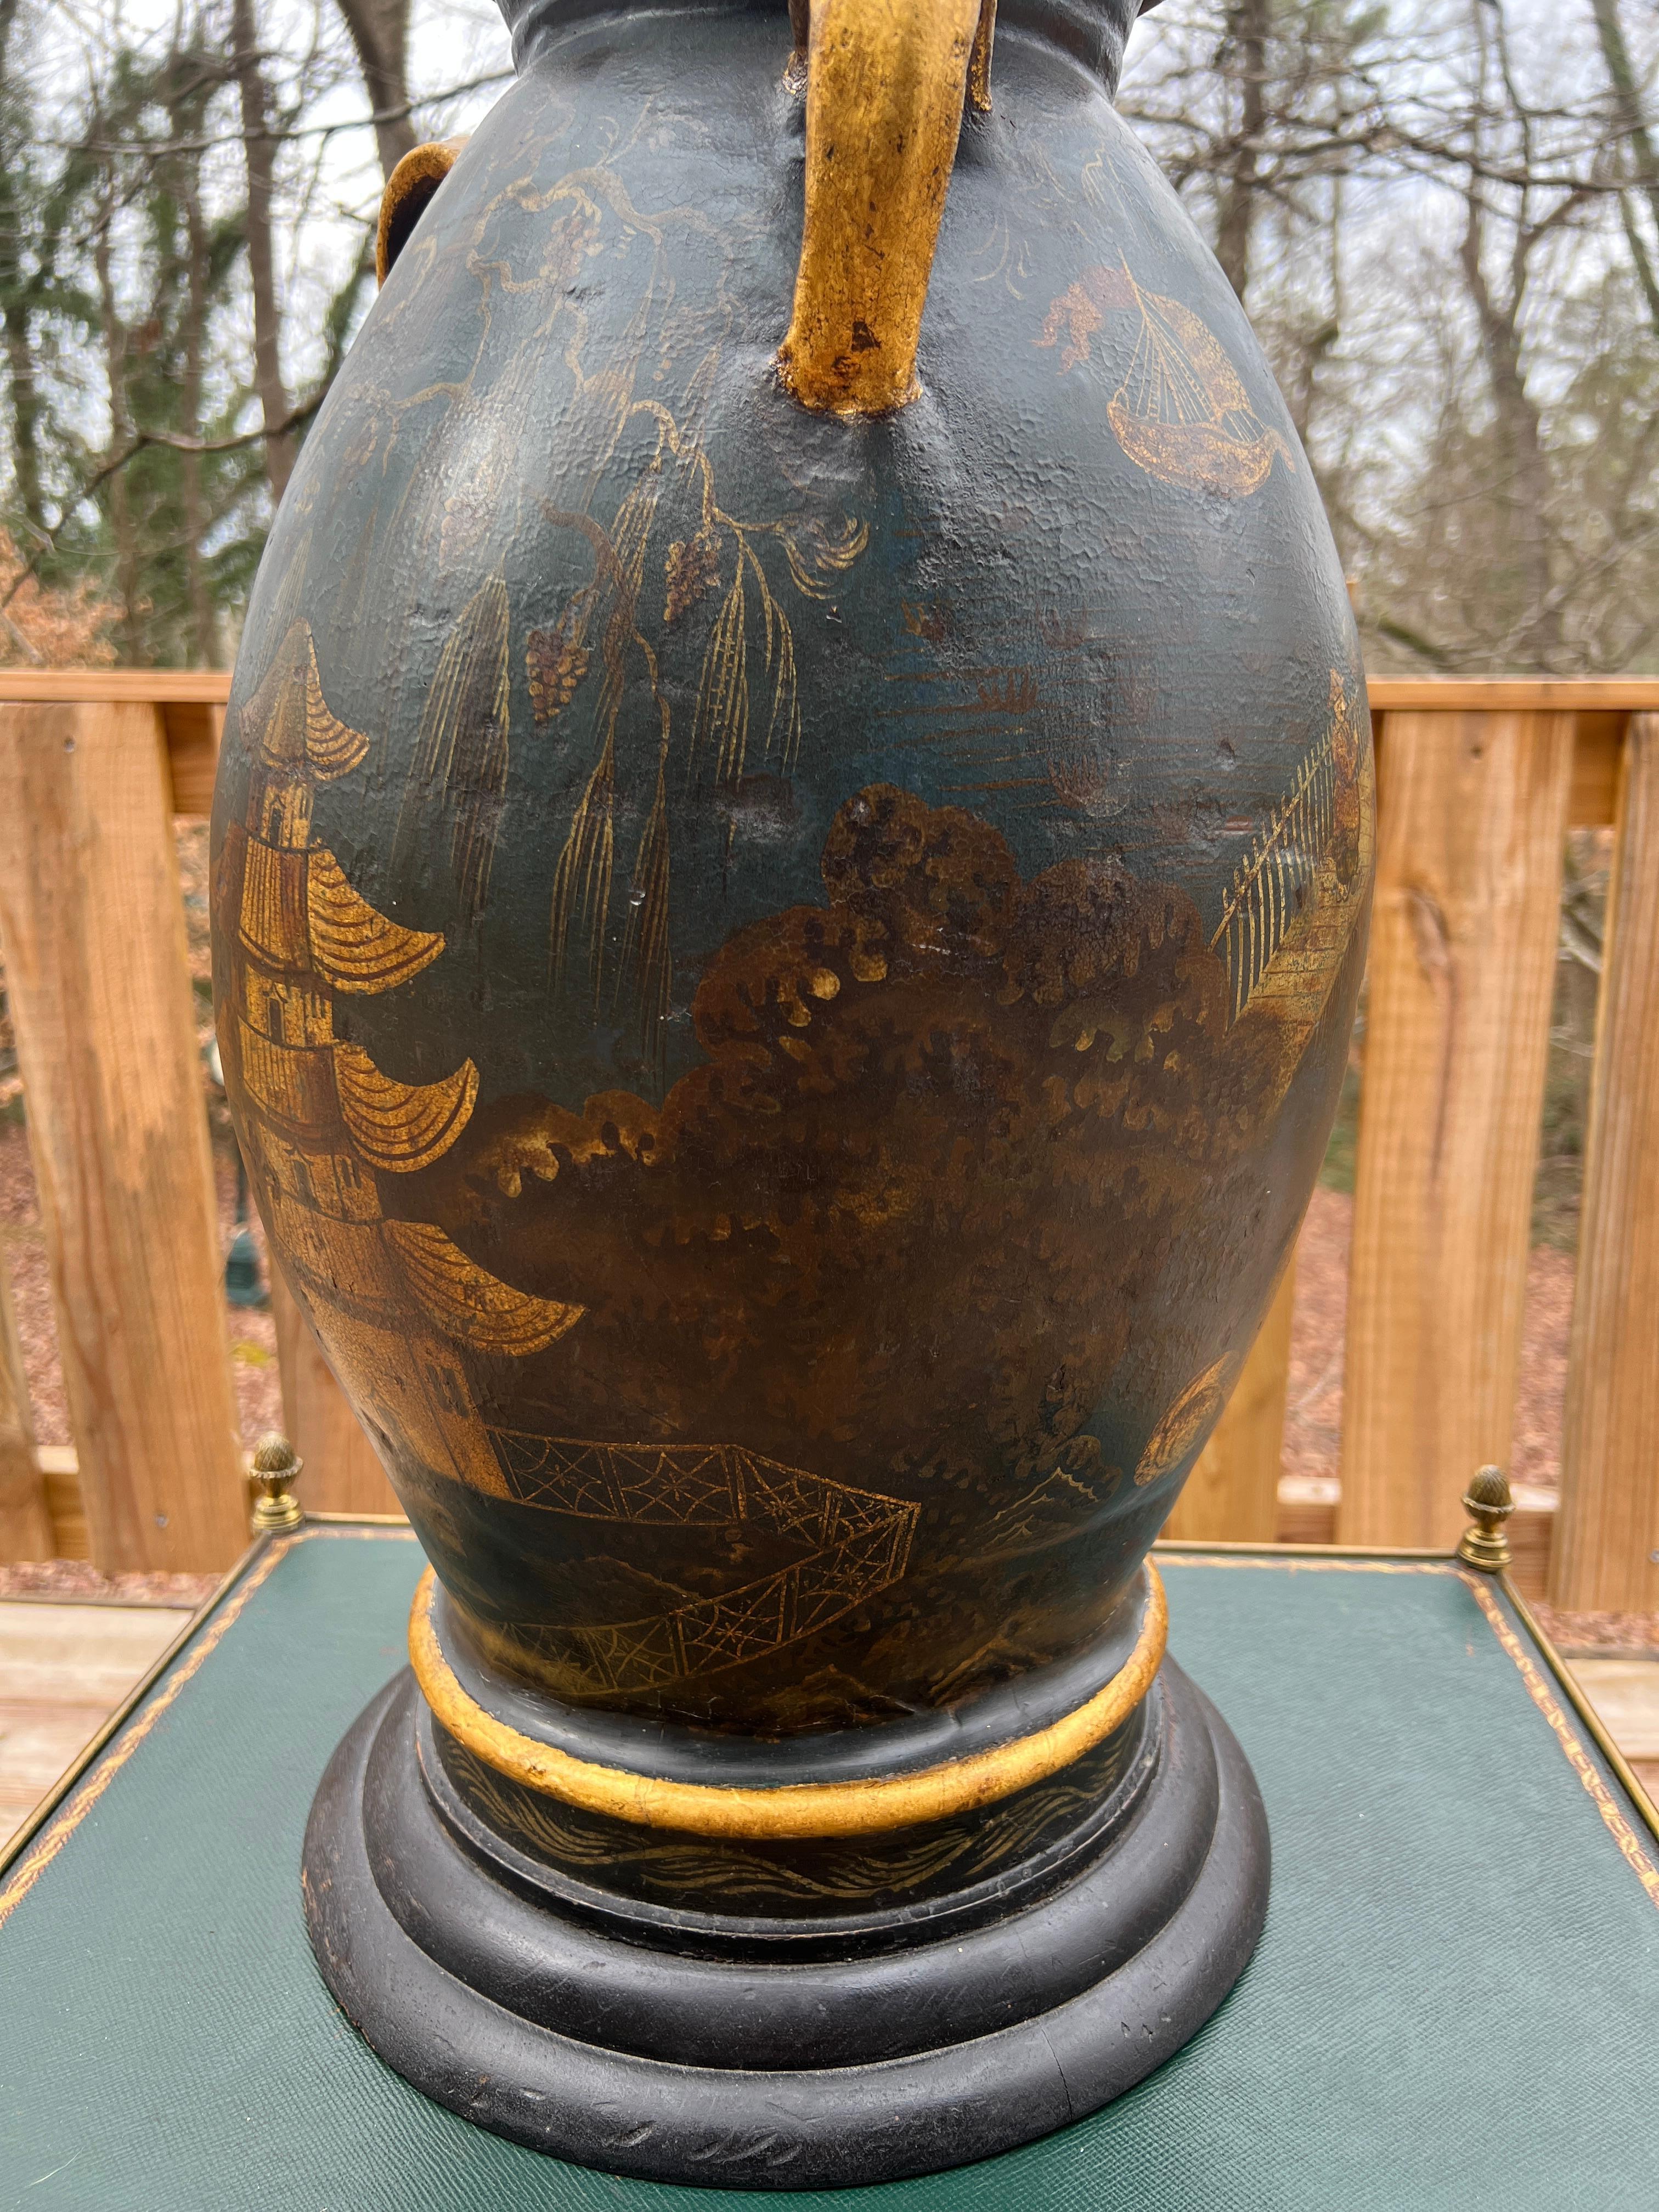 Regency Chinoiserie Decorated Gilt Wood & Tole Handled Urn or Centerpiece C 1820 For Sale 3